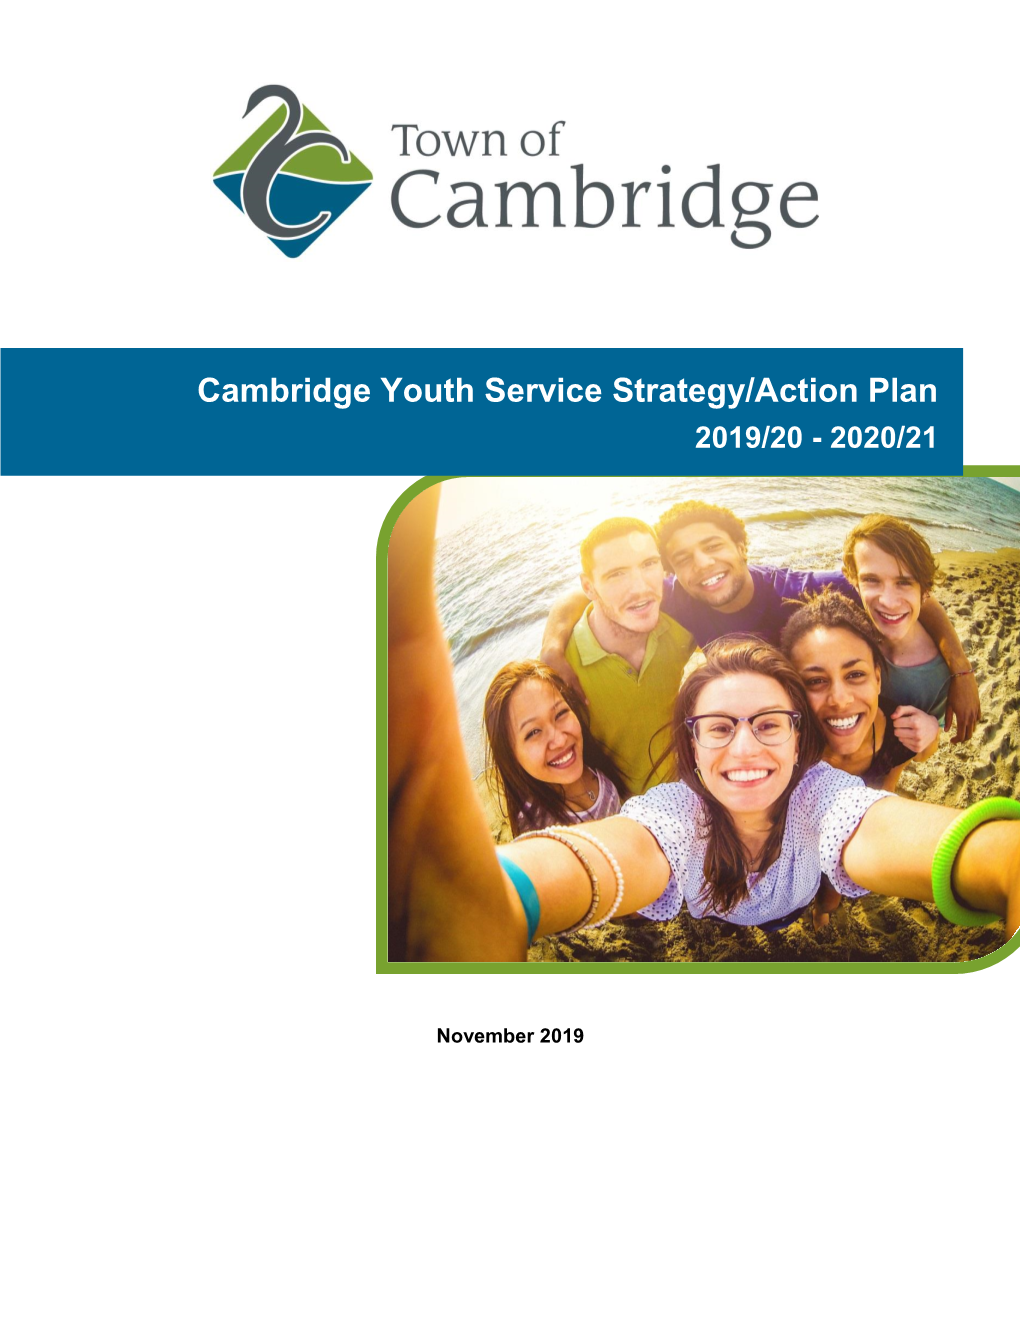 Cambridge Youth Service Strategy/Action Plan 2019/20 - 2020/21